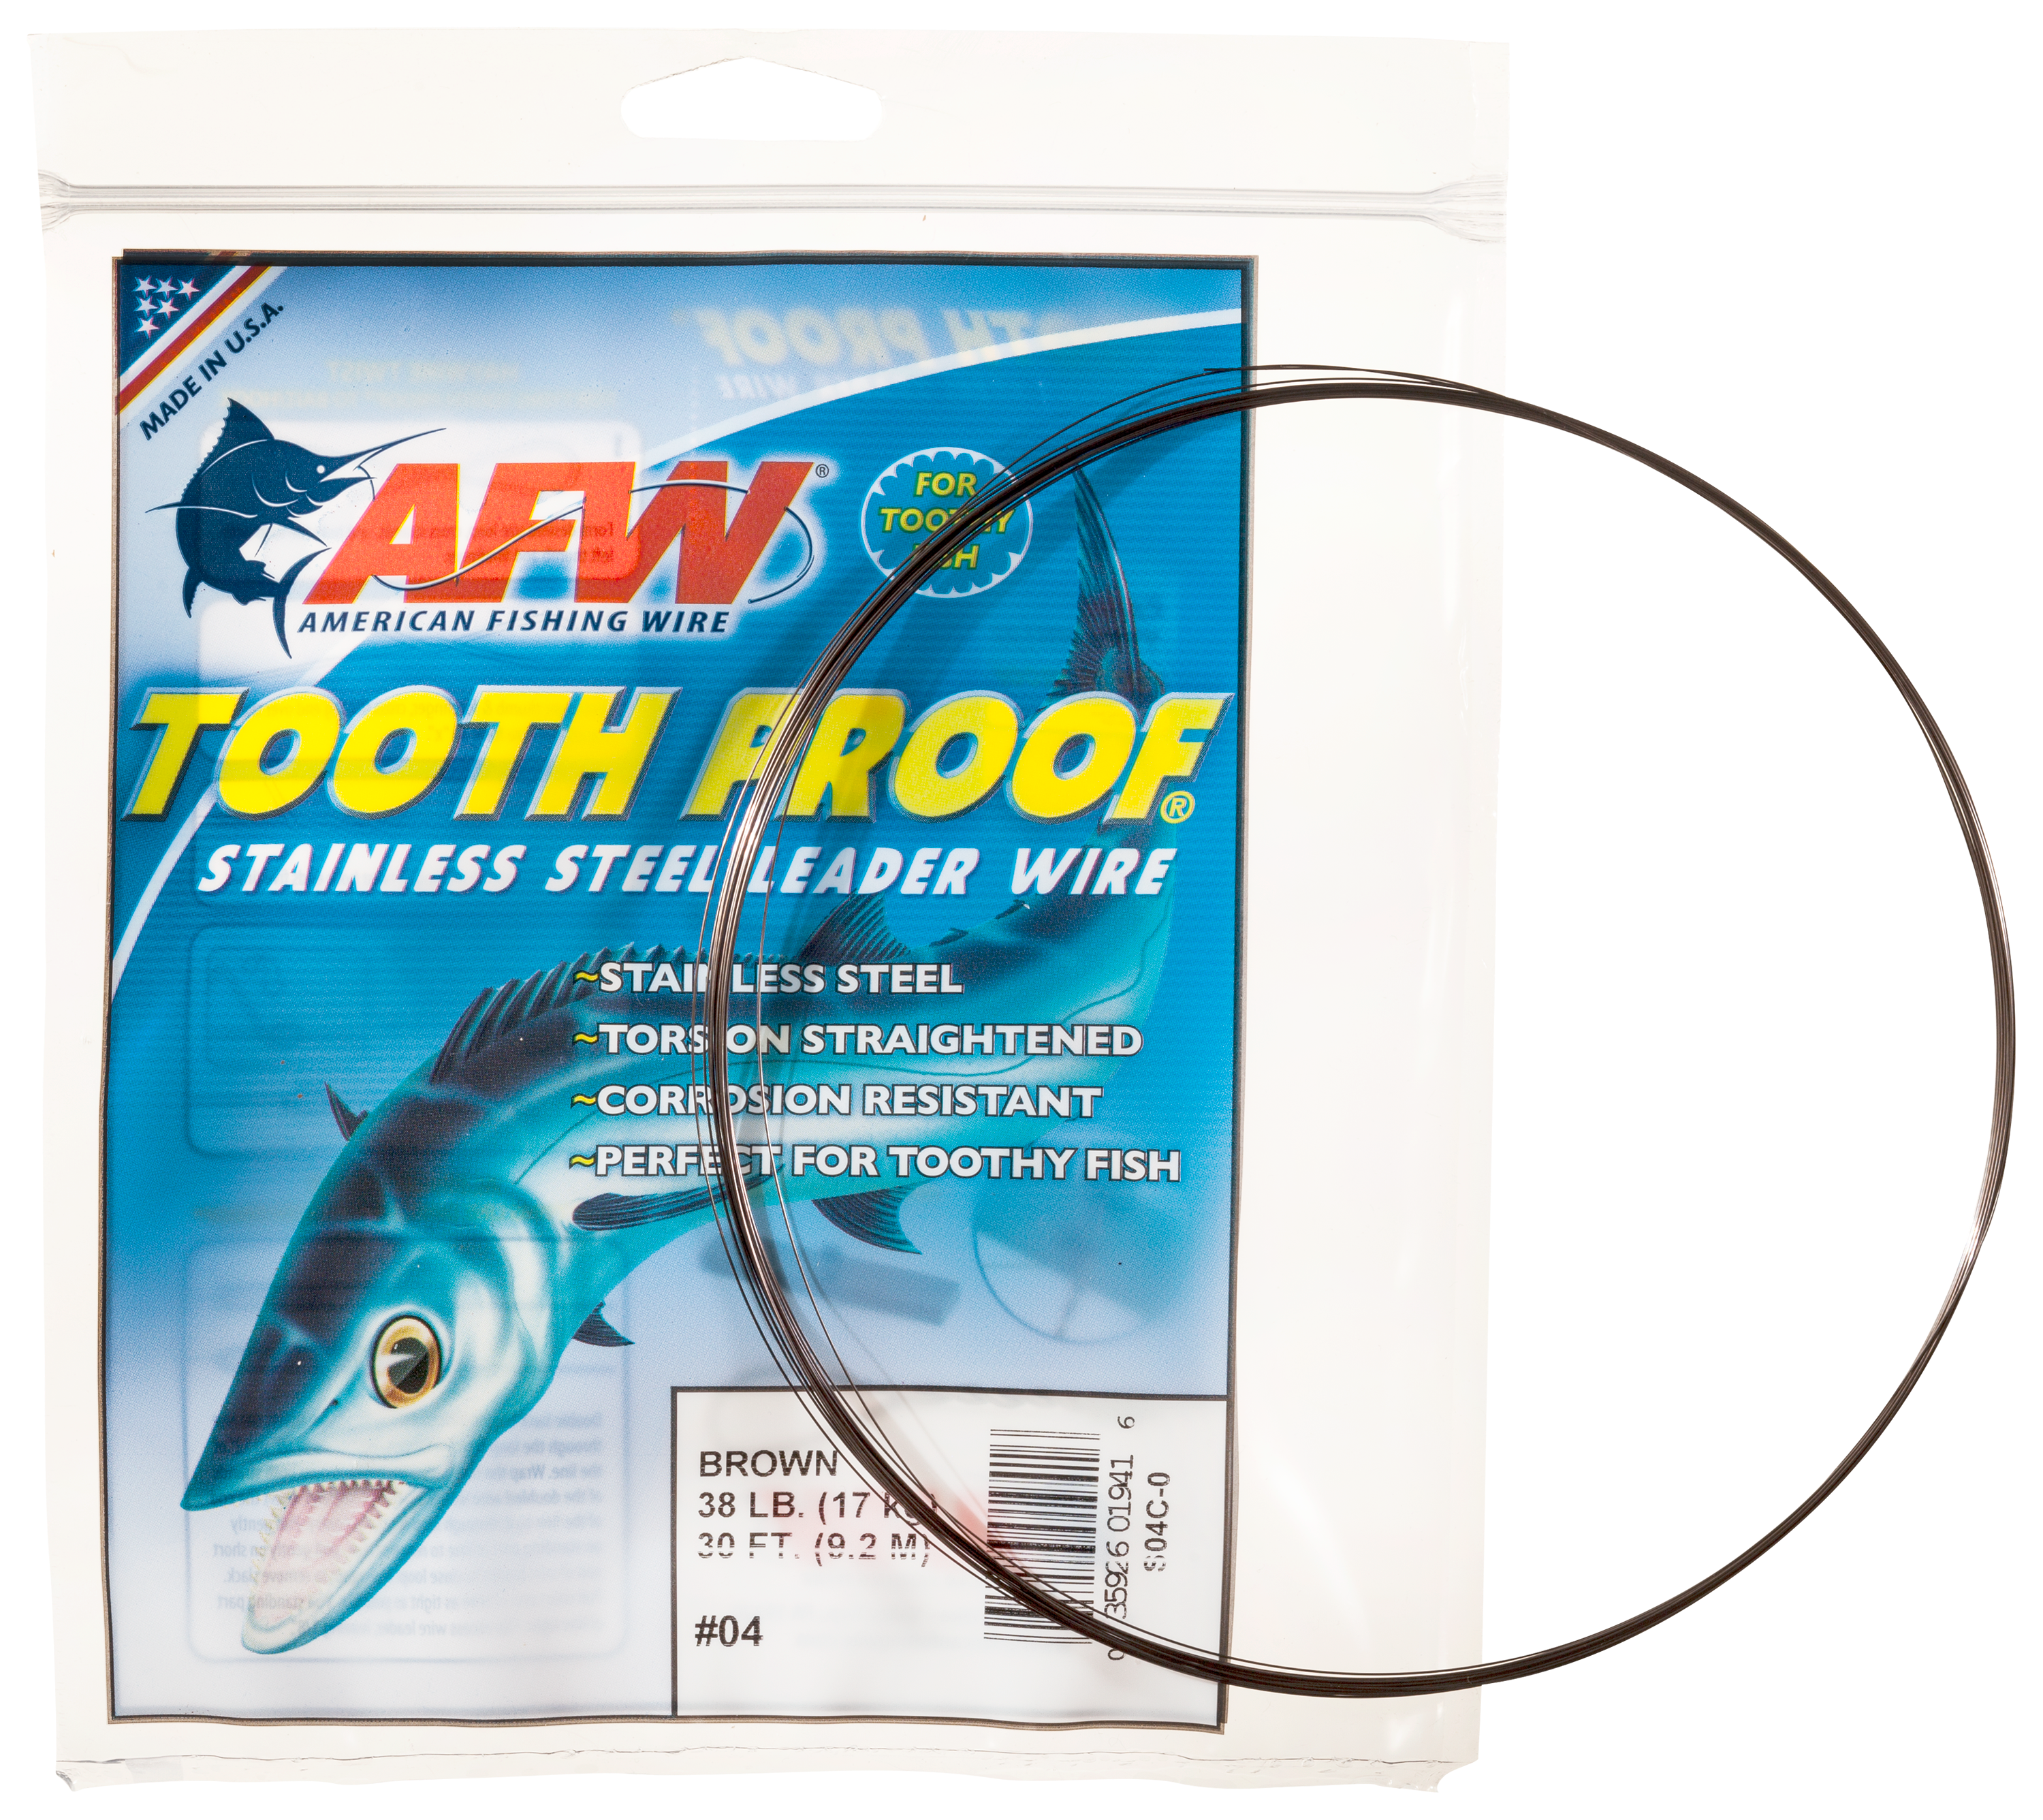 American Fishing Wire Tooth Proof Stainless Steel Leader Wire - 86 lb. Test